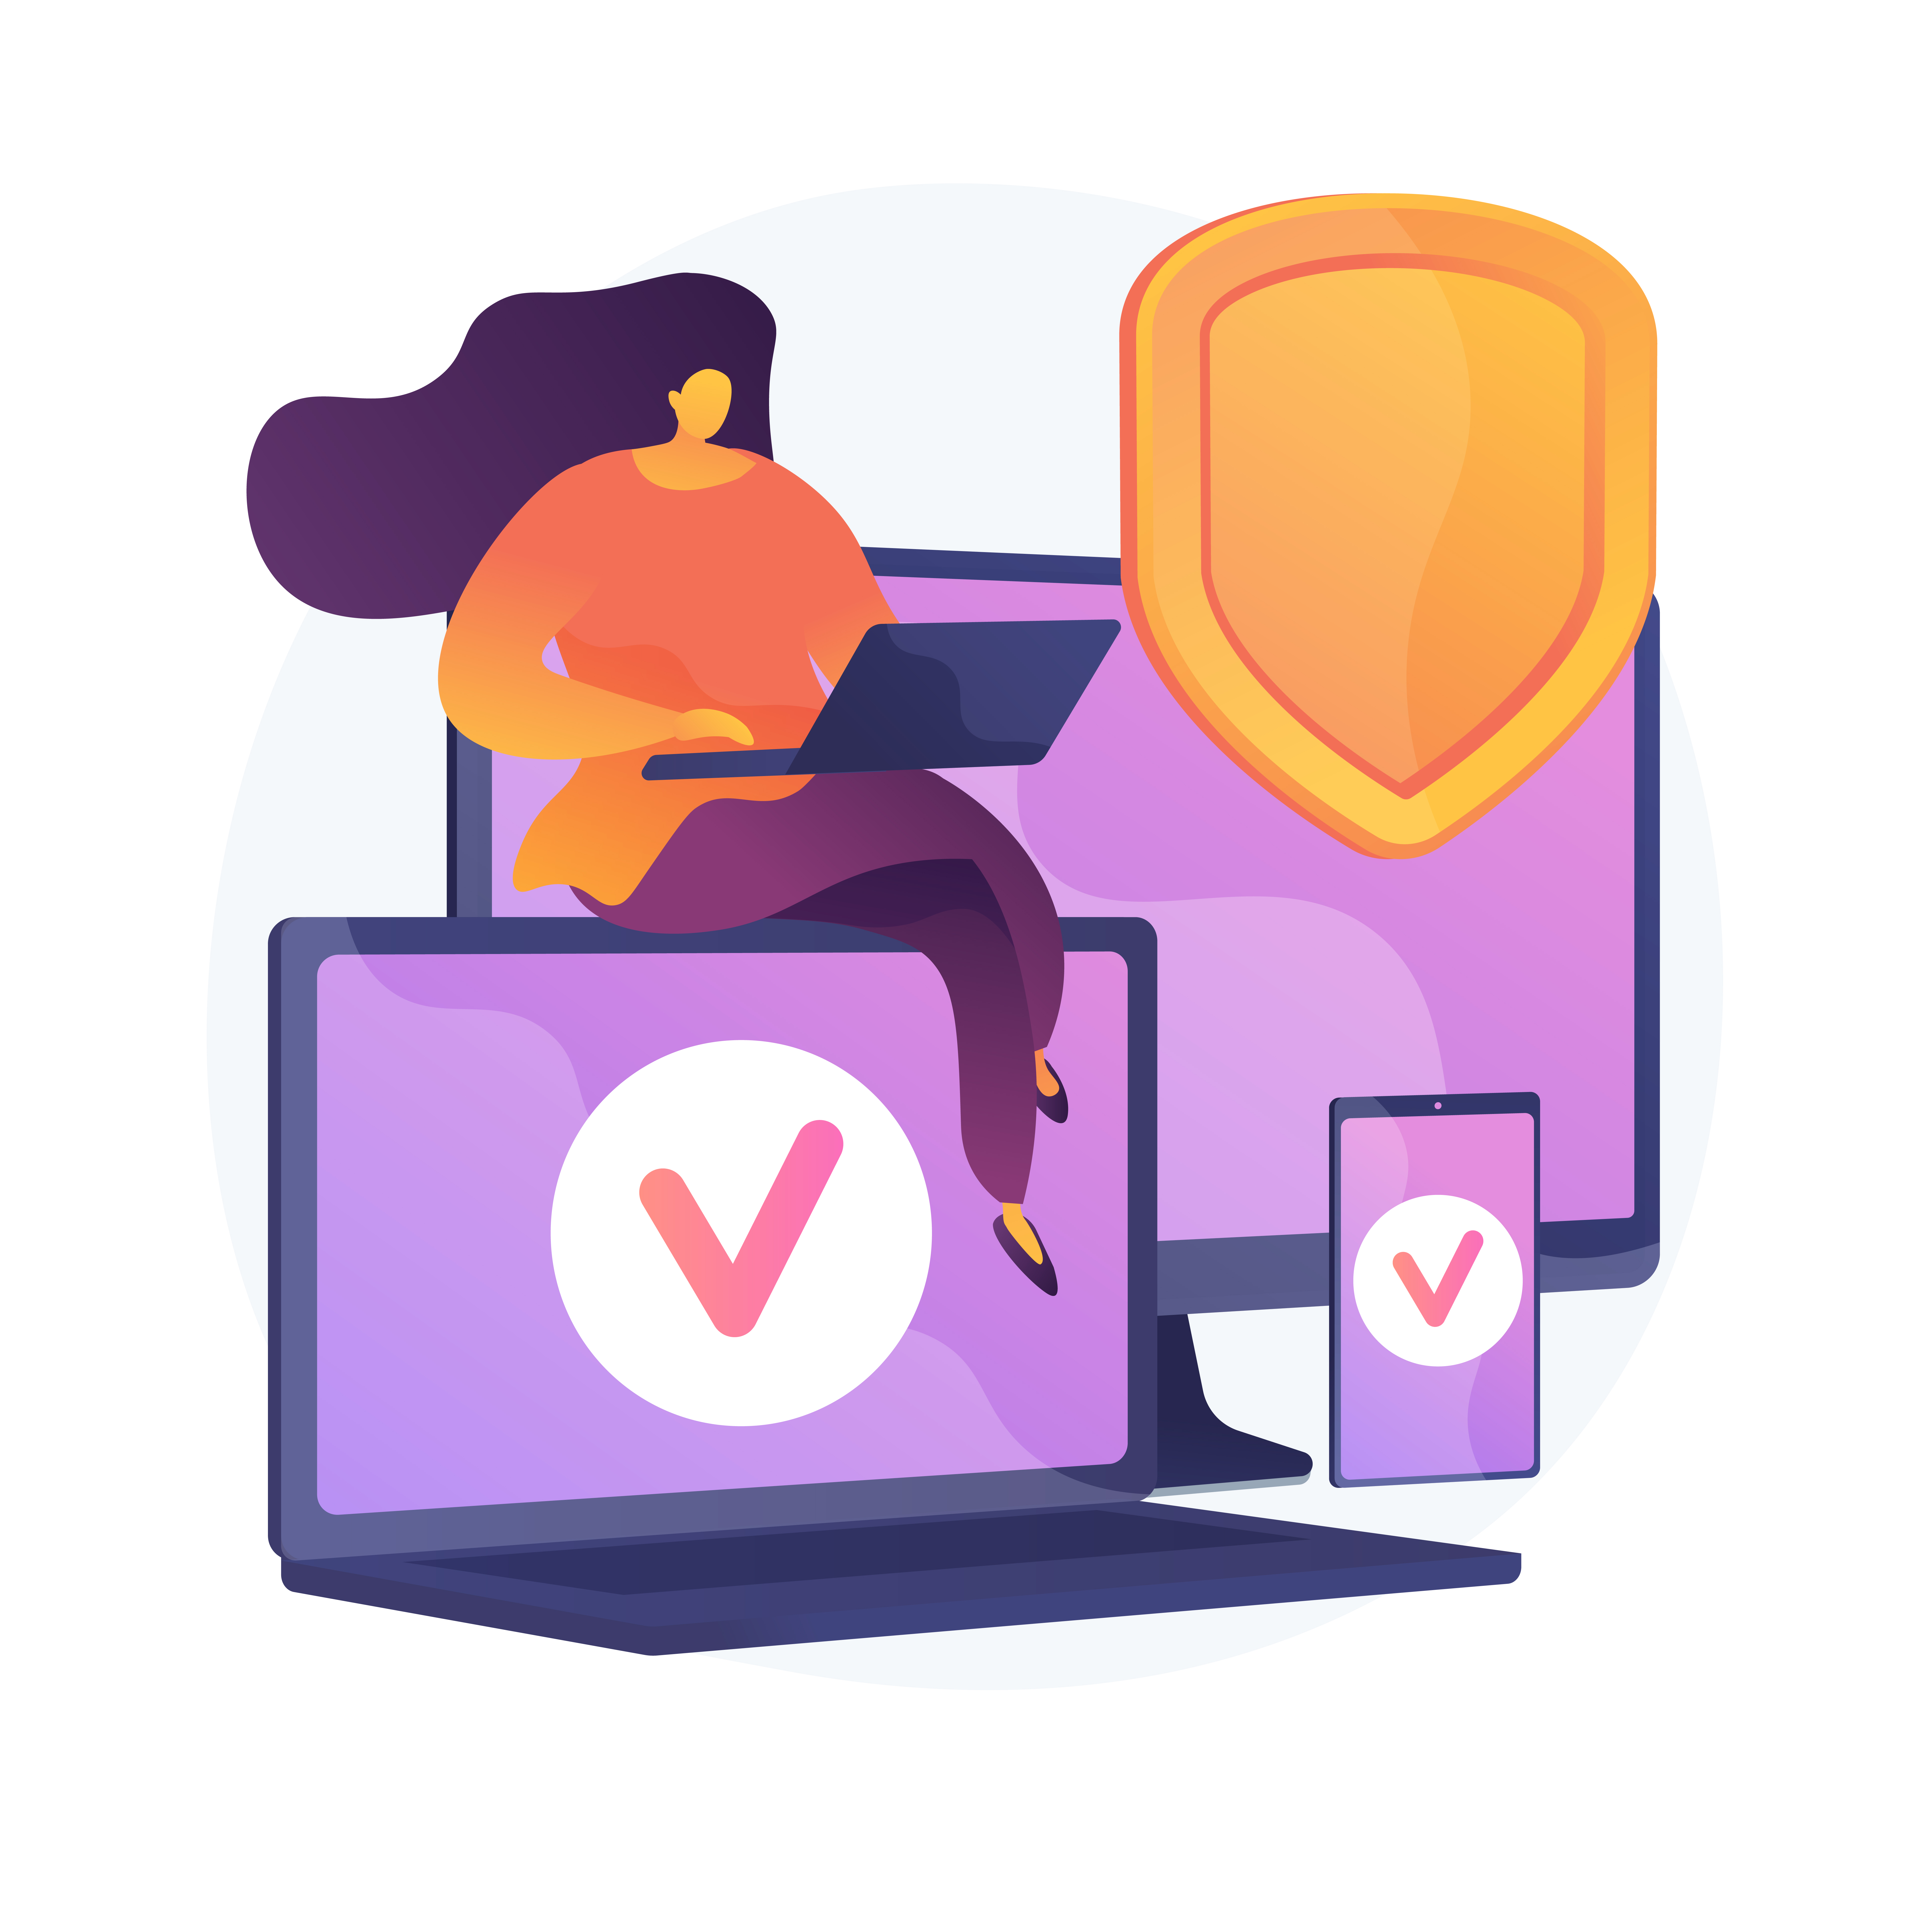 Electronic insurance hardware. Digital insurers website, responsive web design, malware protection software. Gadgets security assurance. Vector isolated concept metaphor illustration - Third-Party Verification.